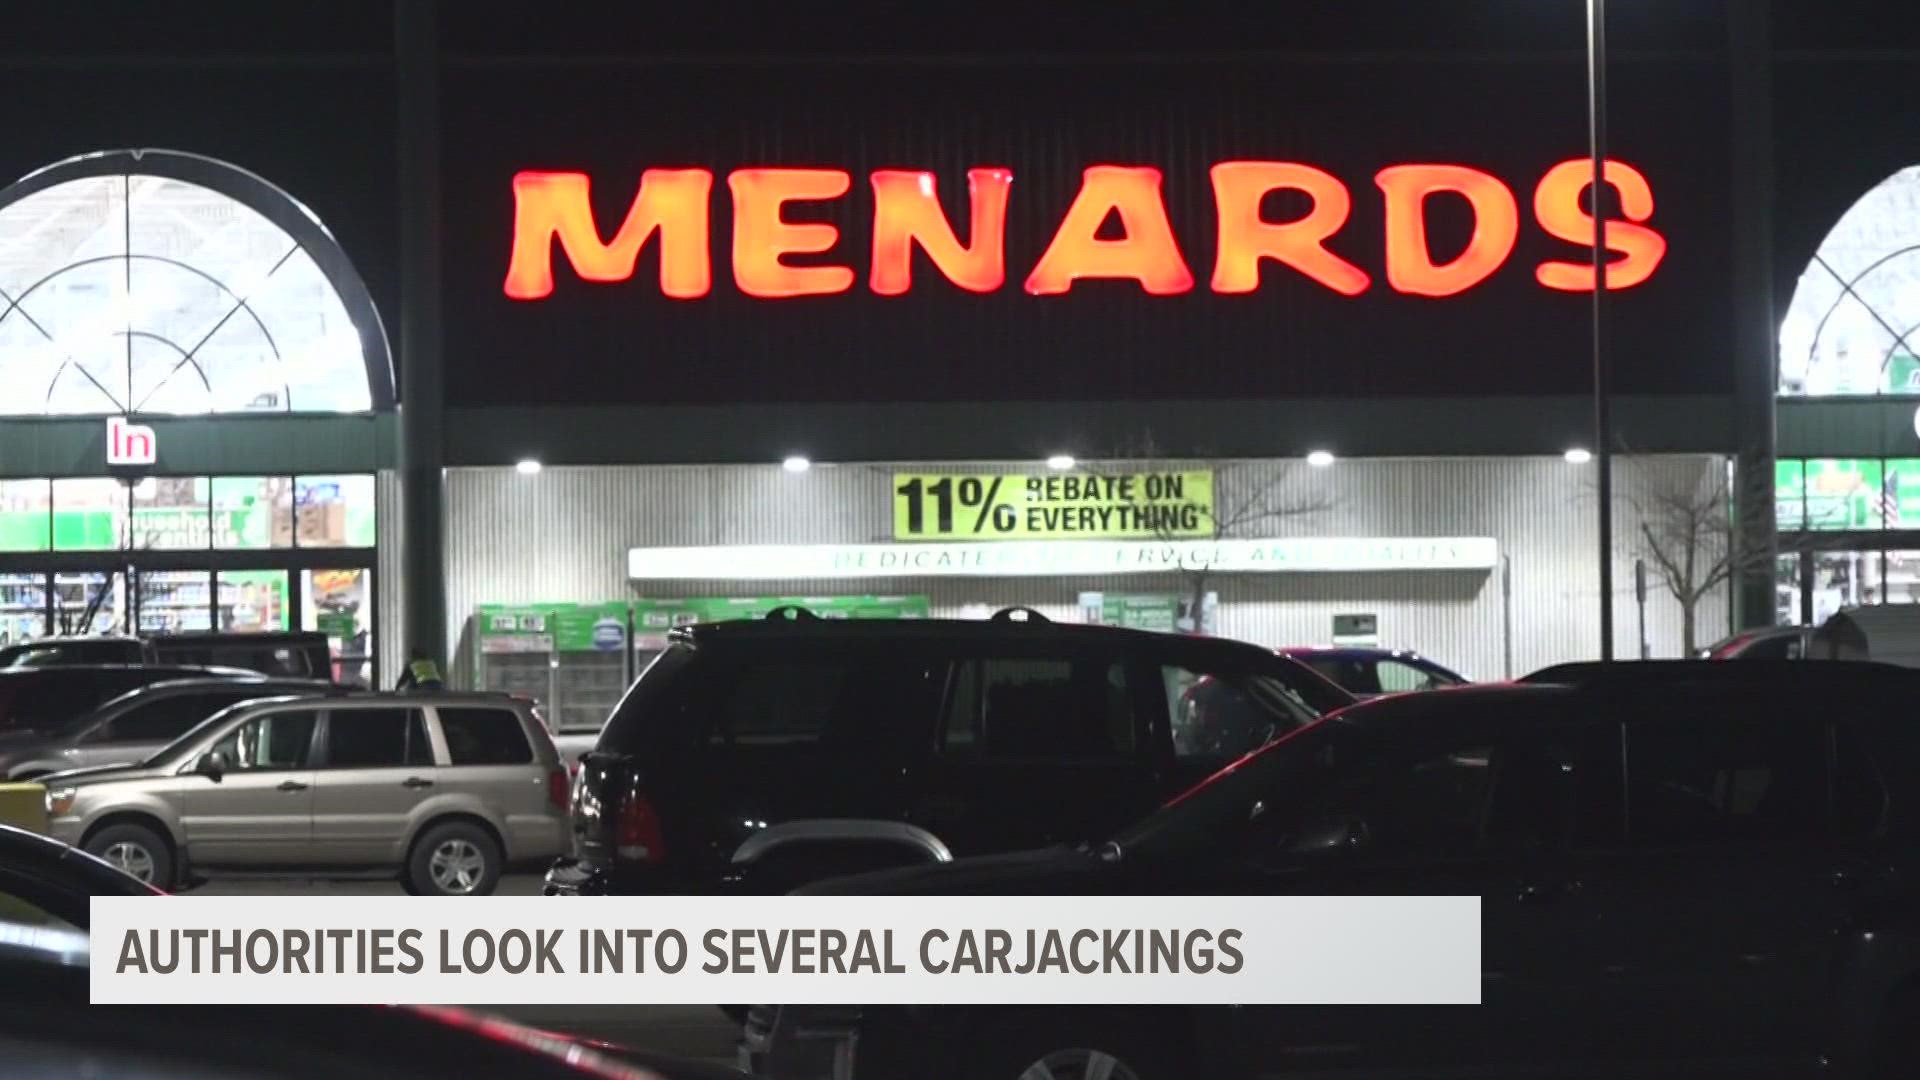 Carjackings are on the rise in Kent County. The Sheriff's Department says they have handled four since the beginning of the year, already exceeding all last year.